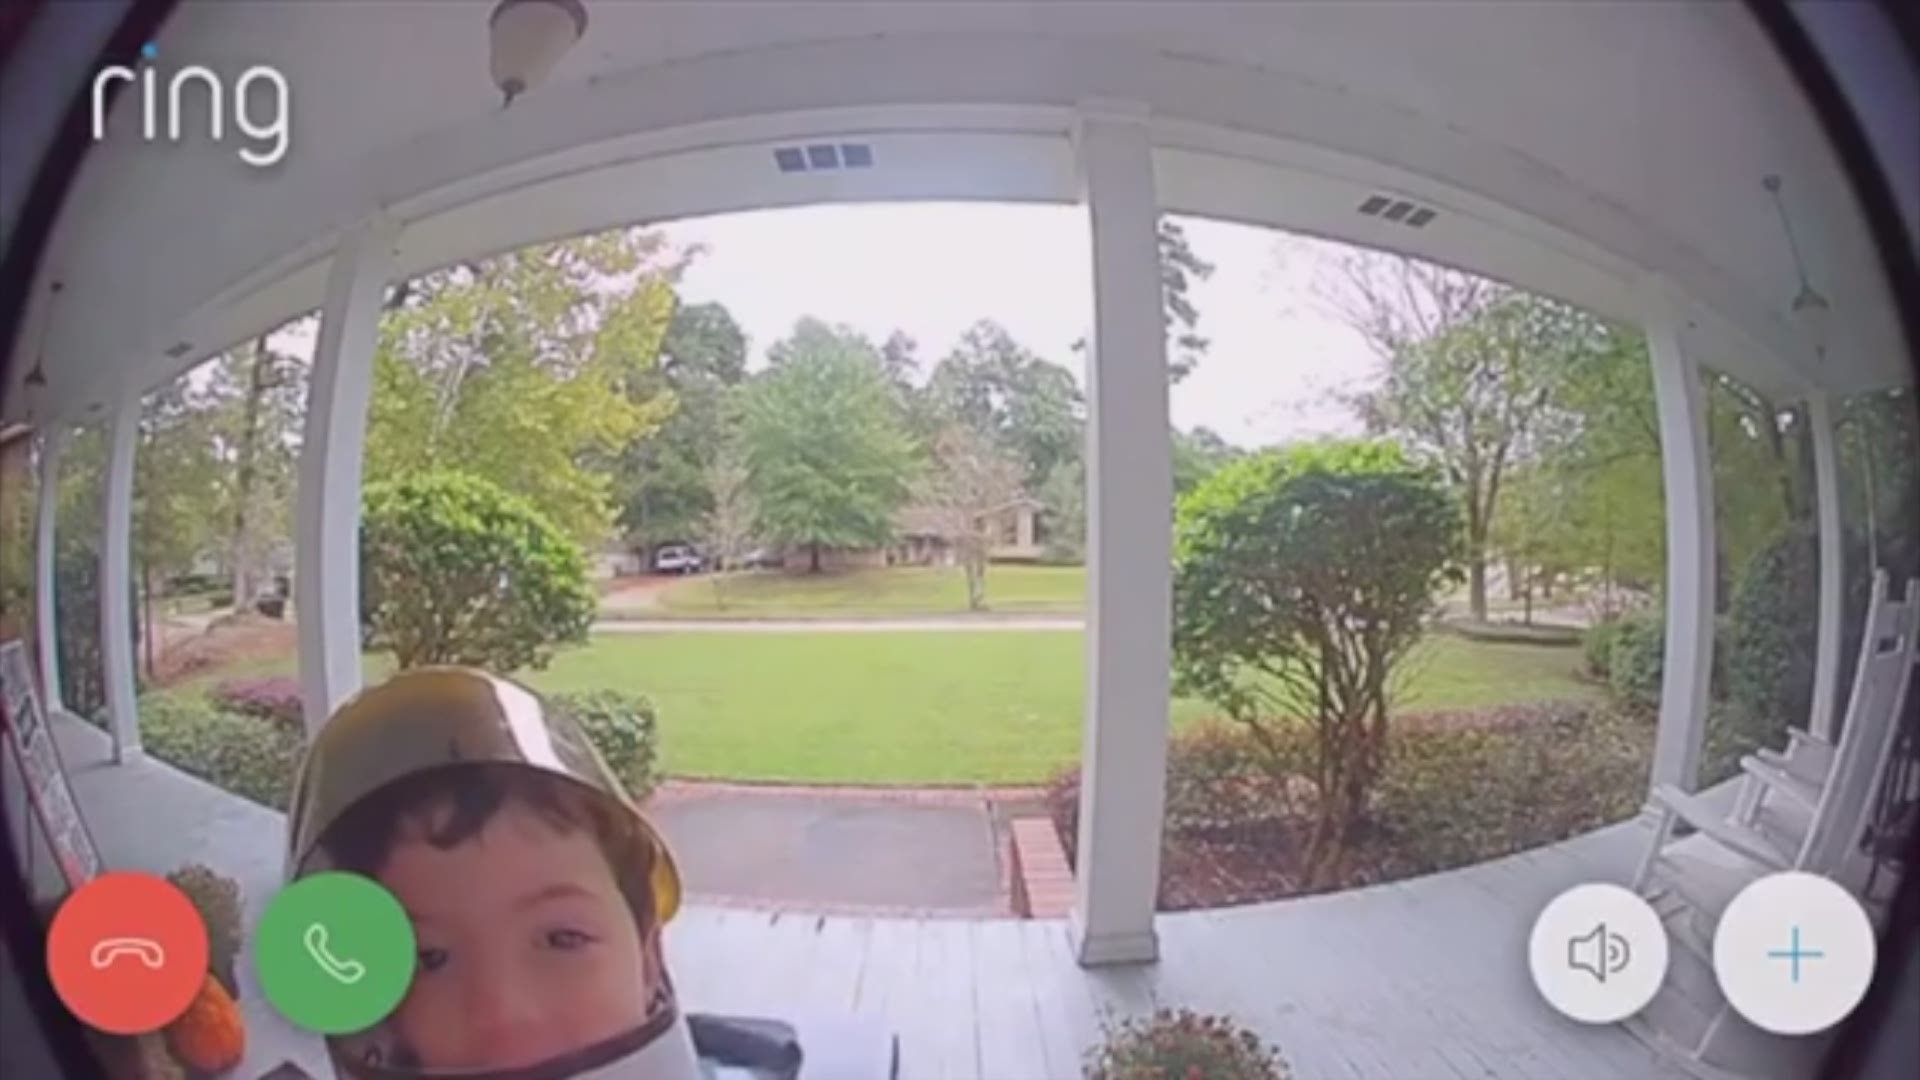 Ring video doorbell captures a cute costumed tike visiting his neighbor before heading to the final frontier.